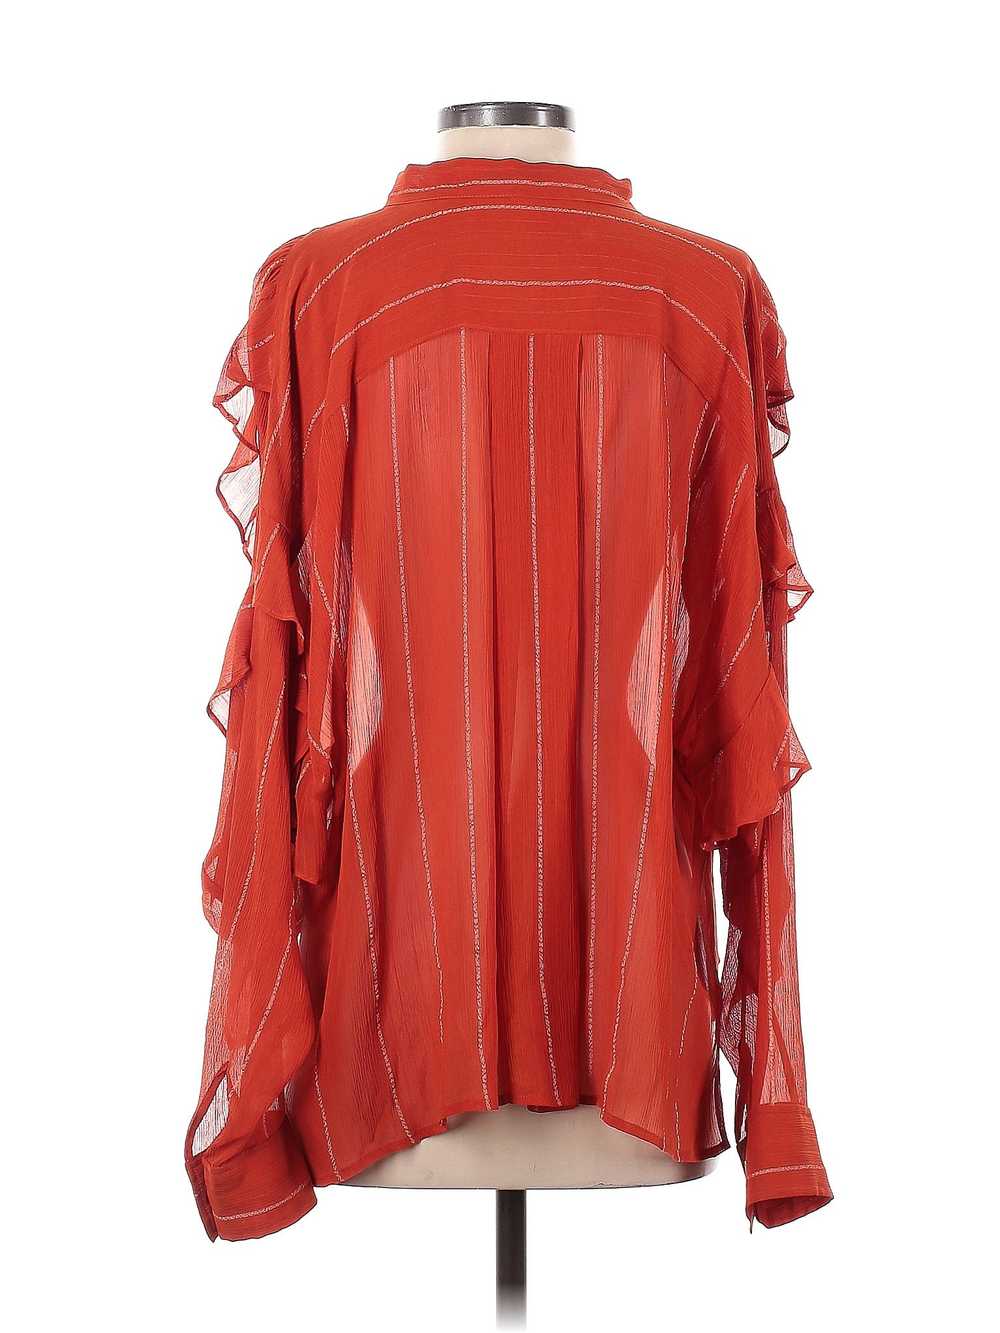 Joie Women Red Long Sleeve Blouse XS - image 2